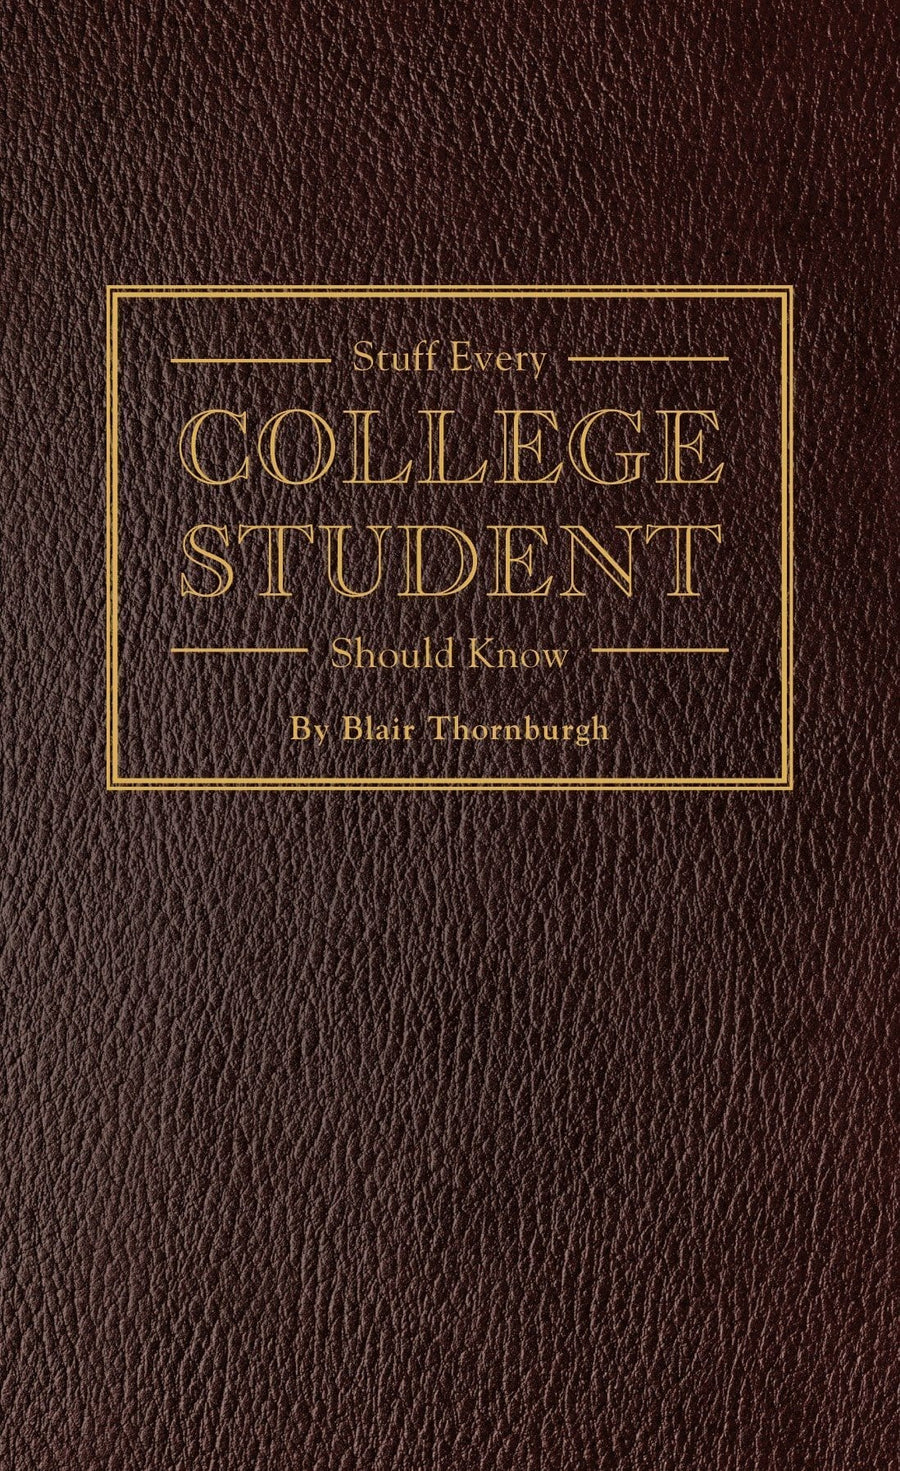 Penguin Random House Book Stuff Every College Student Should Know